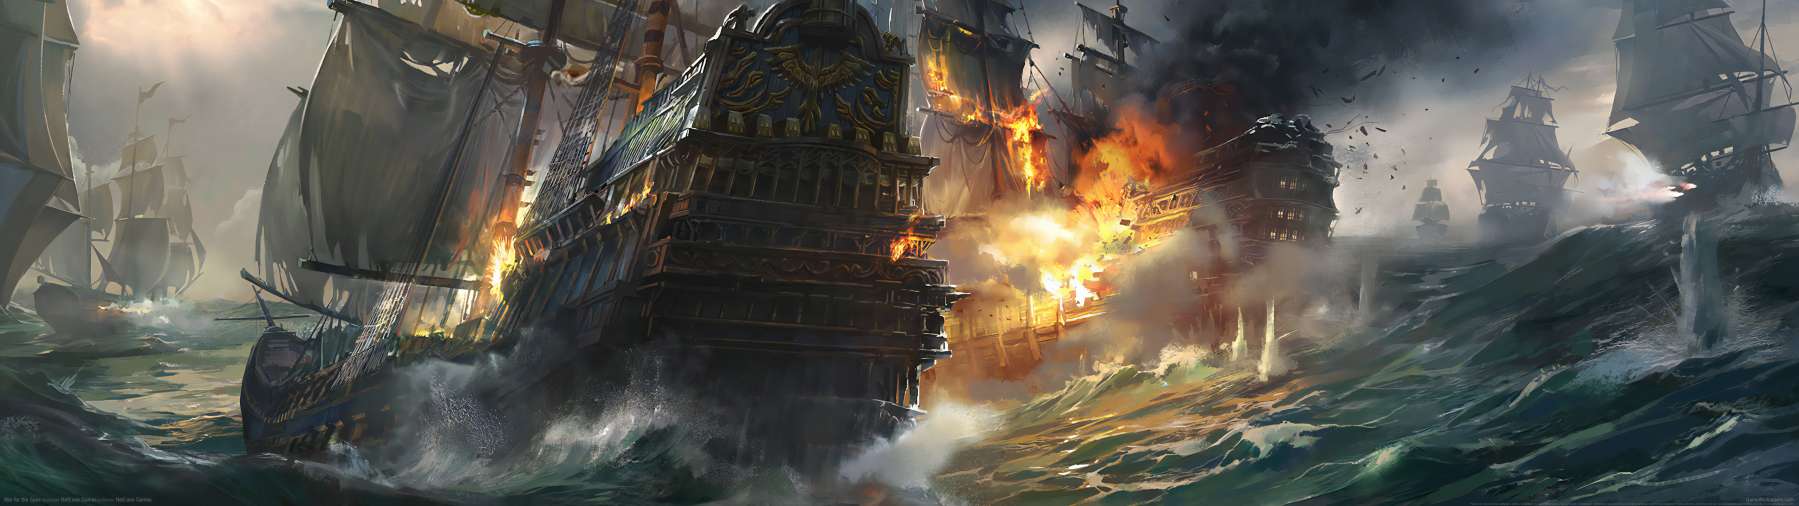 War of the Seas superwide wallpaper or background 01